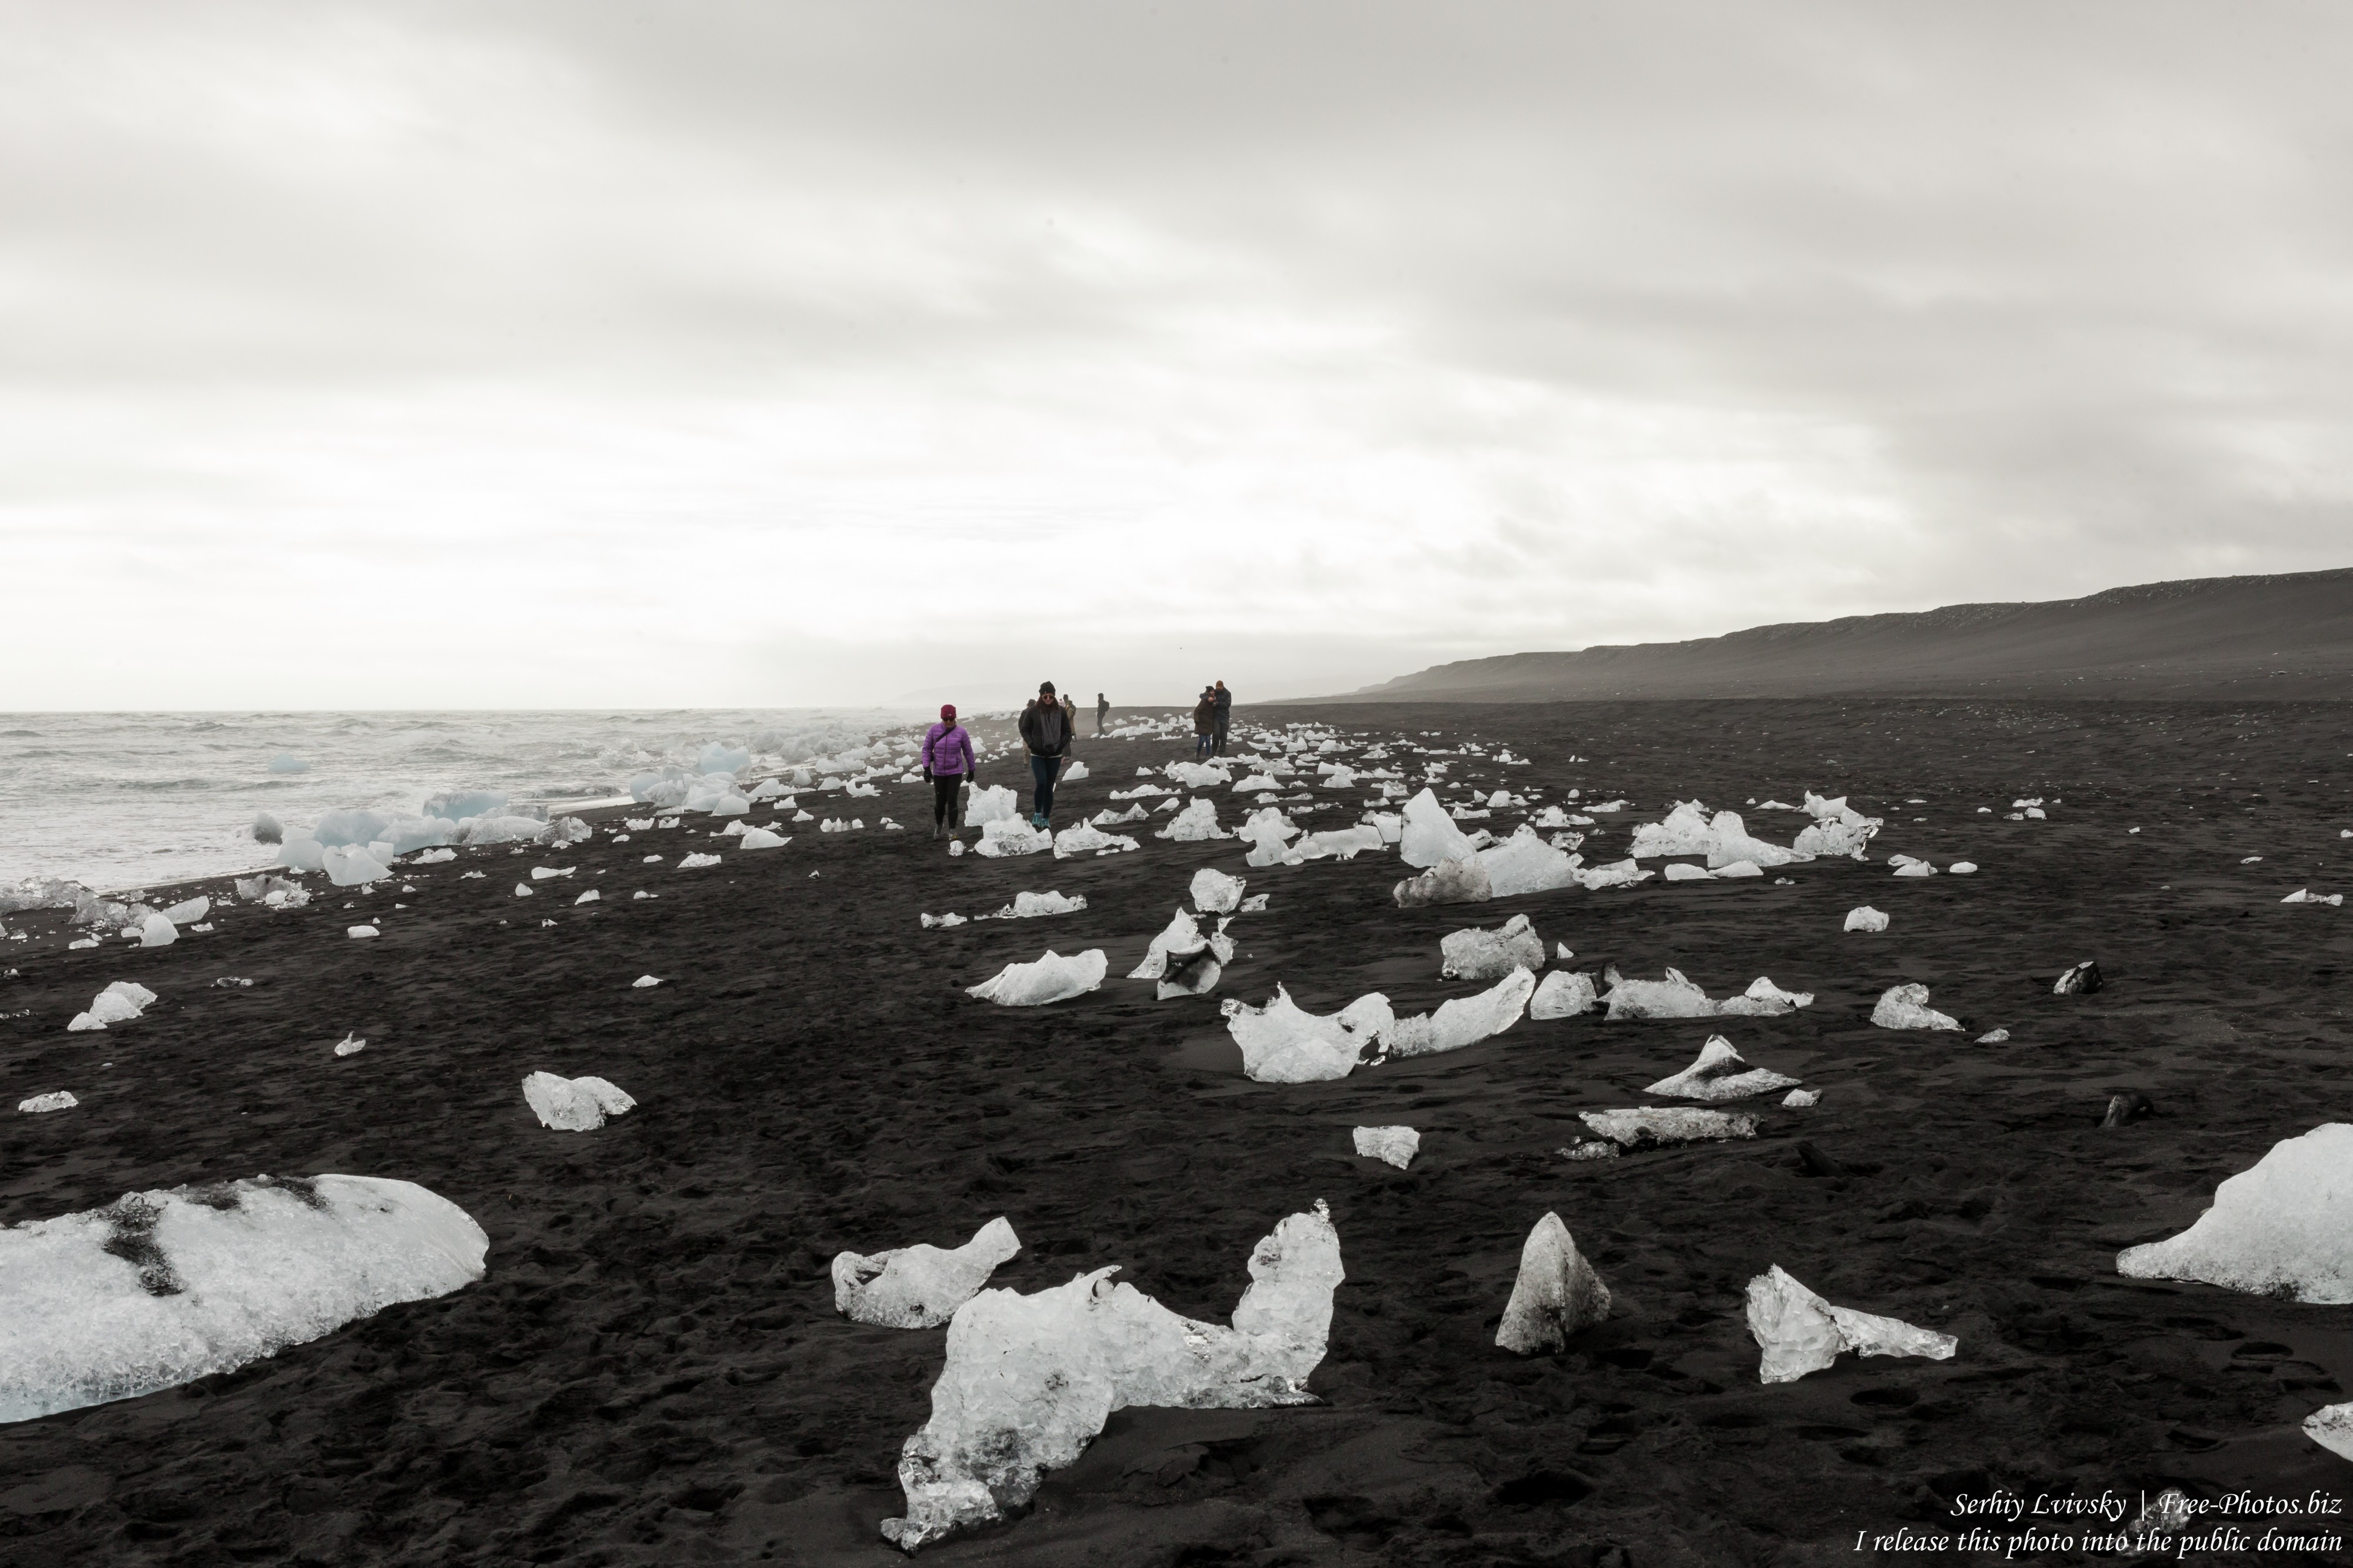 Diamond Beach, Iceland, in May 2019, photographed by Serhiy Lvivsky, picture 9